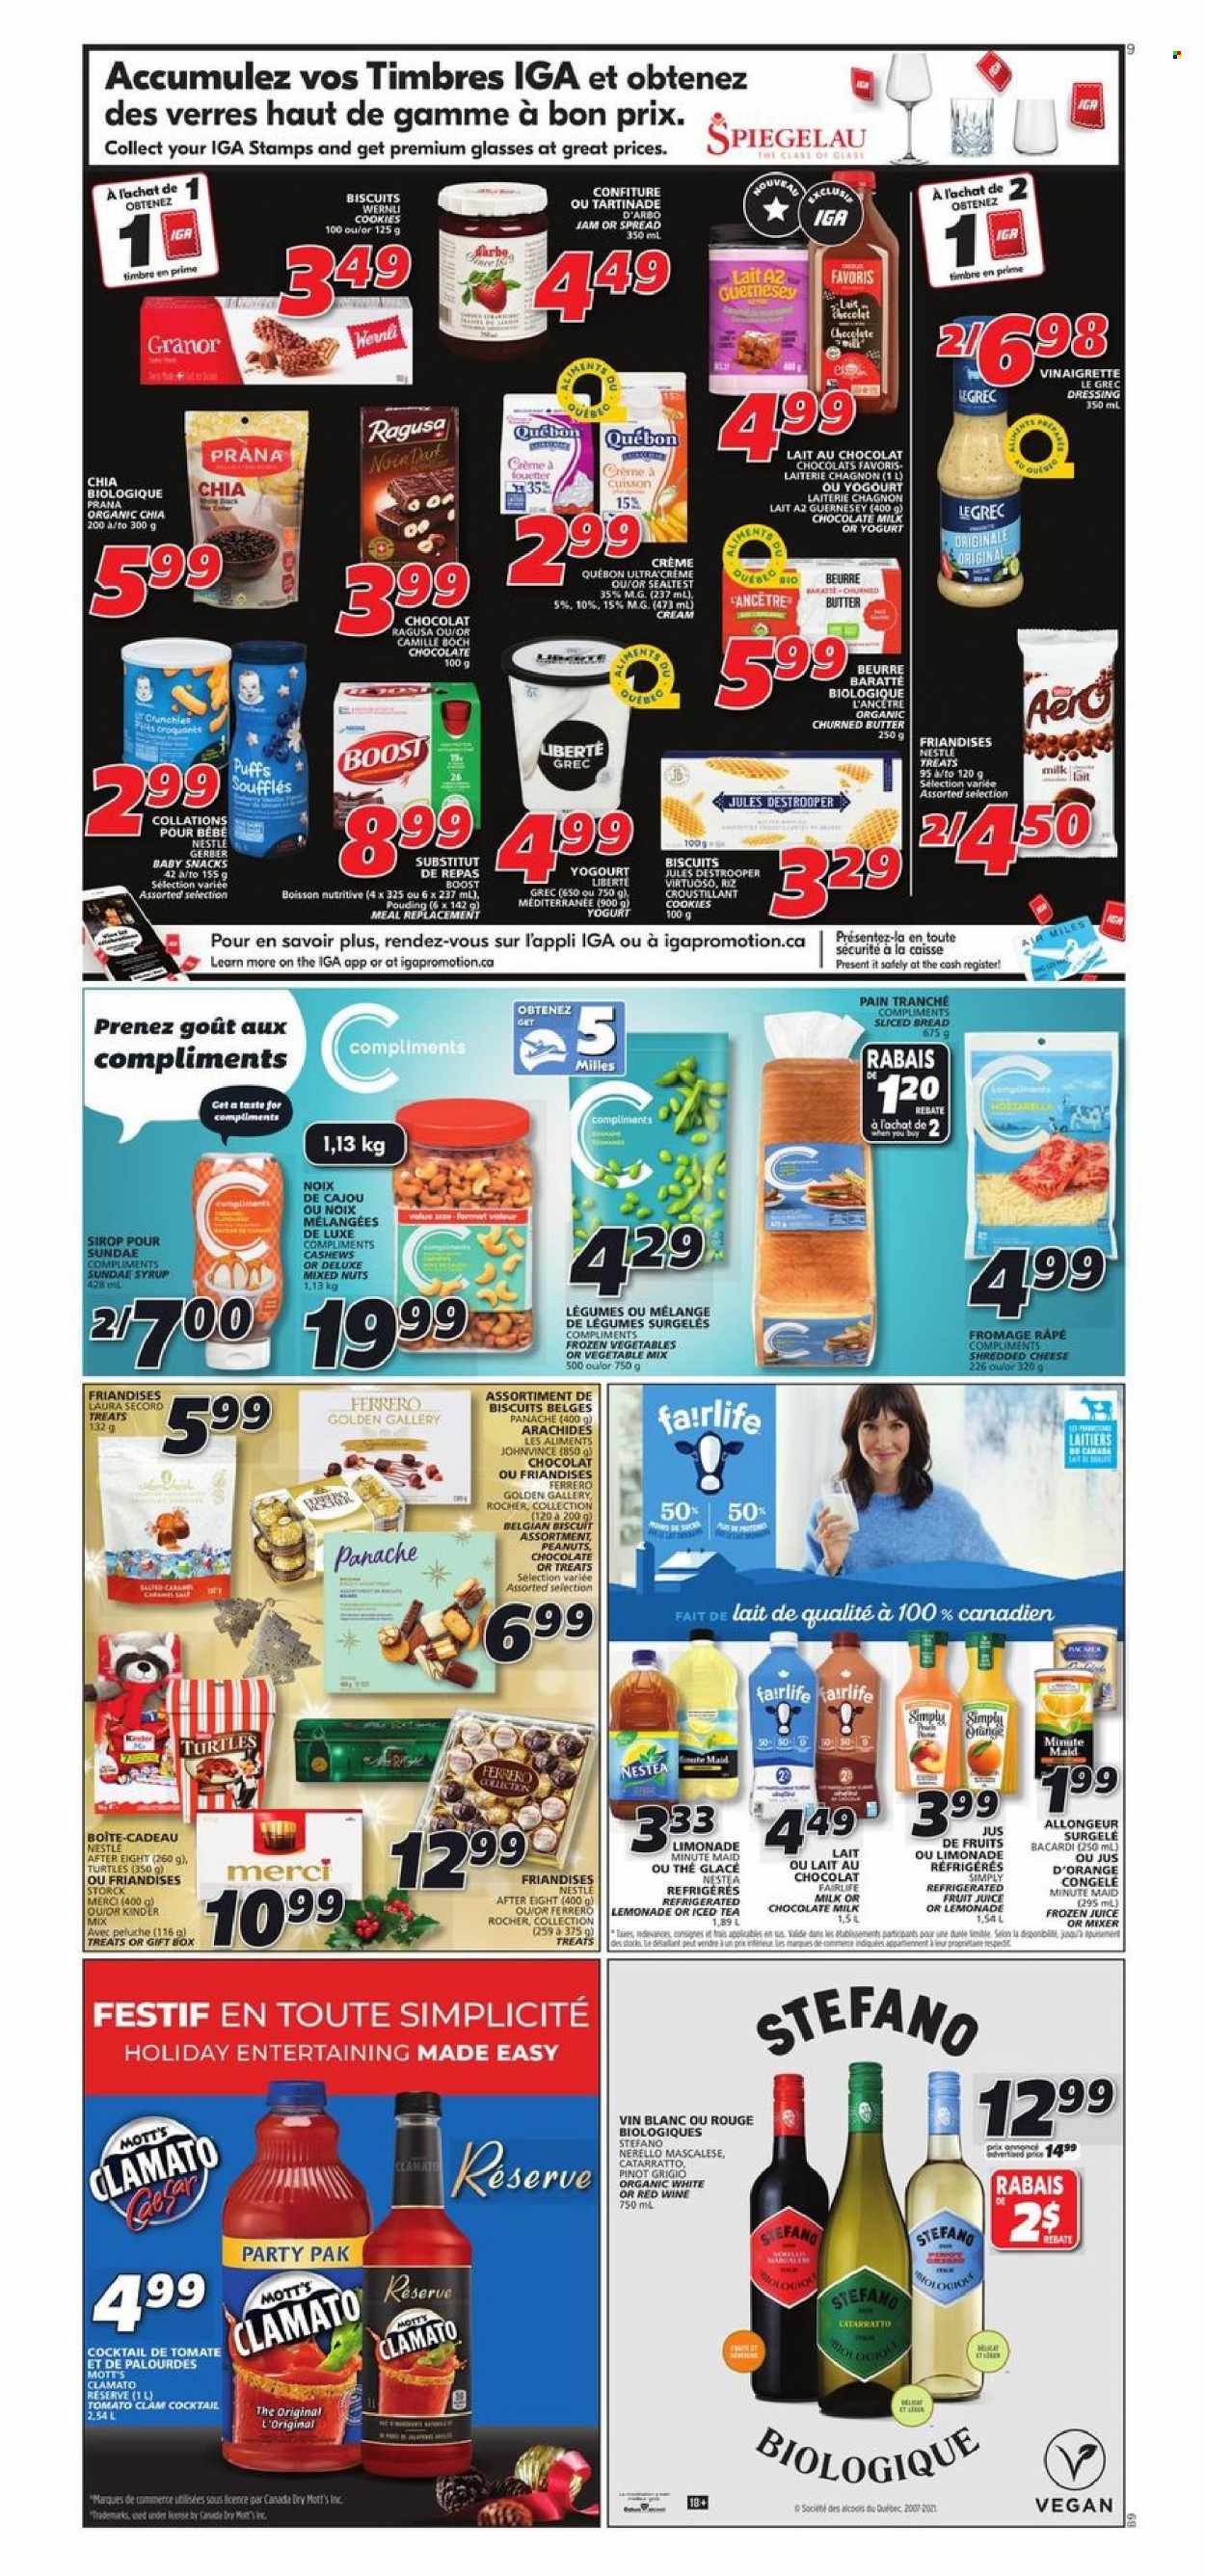 thumbnail - IGA Flyer - December 02, 2021 - December 08, 2021 - Sales products - bread, puffs, Mott's, clams, shredded cheese, yoghurt, milk, butter, frozen vegetables, cookies, milk chocolate, chocolate, snack, biscuit, After Eight, Merci, Gerber, vinaigrette dressing, dressing, fruit jam, syrup, cashews, peanuts, mixed nuts, Canada Dry, lemonade, juice, fruit juice, ice tea, Clamato, fruit punch, Boost, red wine, white wine, wine, Pinot Grigio, Bacardi, Nestlé, Ferrero Rocher, oranges. Page 8.